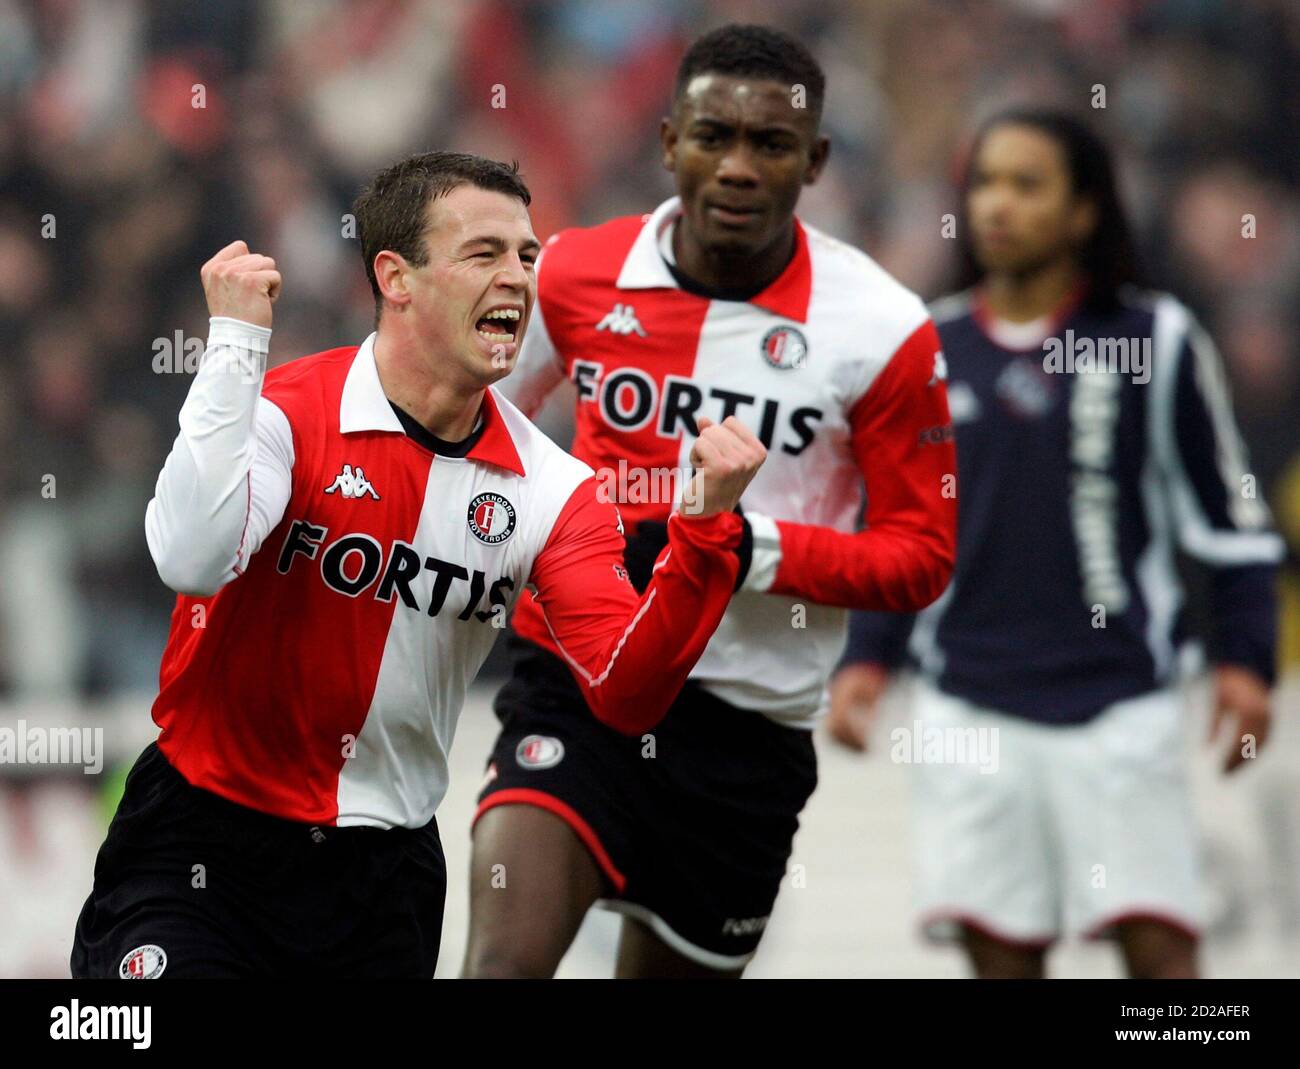 Nicky Hofs (L) and Salomon Kalou (C) of Feyenoord Rotterdam celebrate Hof's  goal against Ajax Amsterdam during their Dutch league soccer match in the  Kuip Stadium in Rotterdam, the Netherlands February 5,